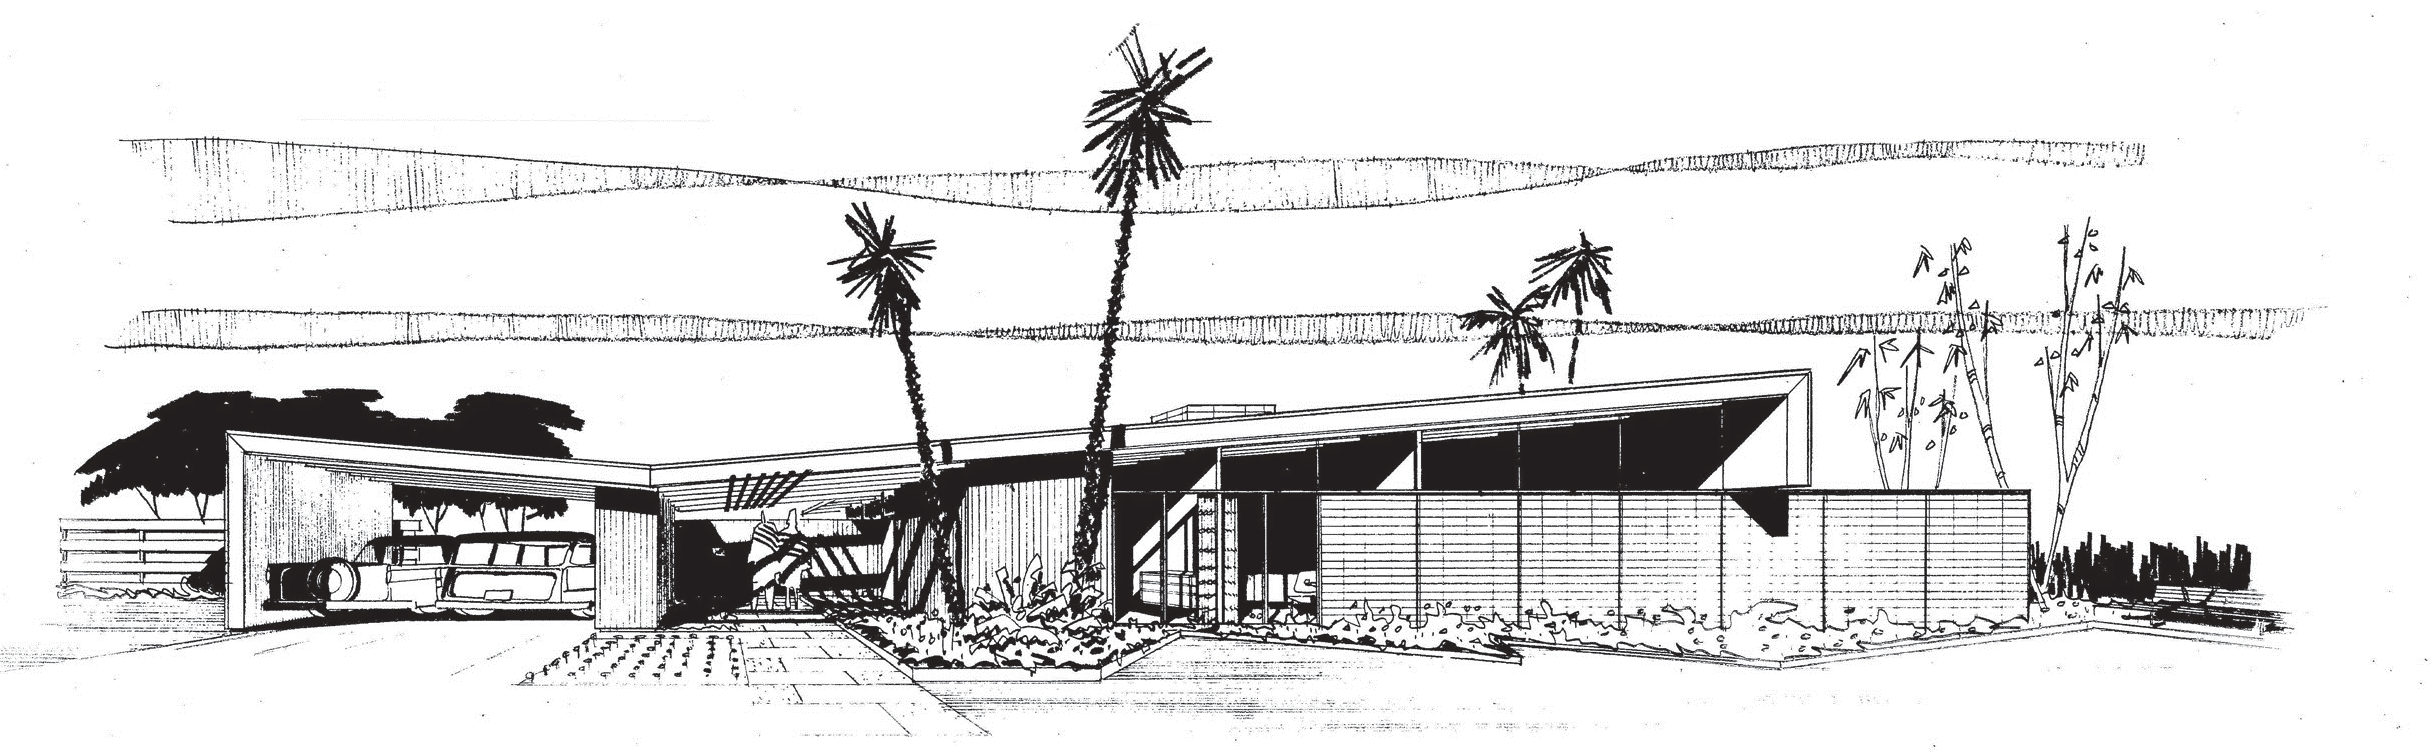 Black and white architectural sketch of a mid-century modern style house with palm trees, large windows, and a carport.